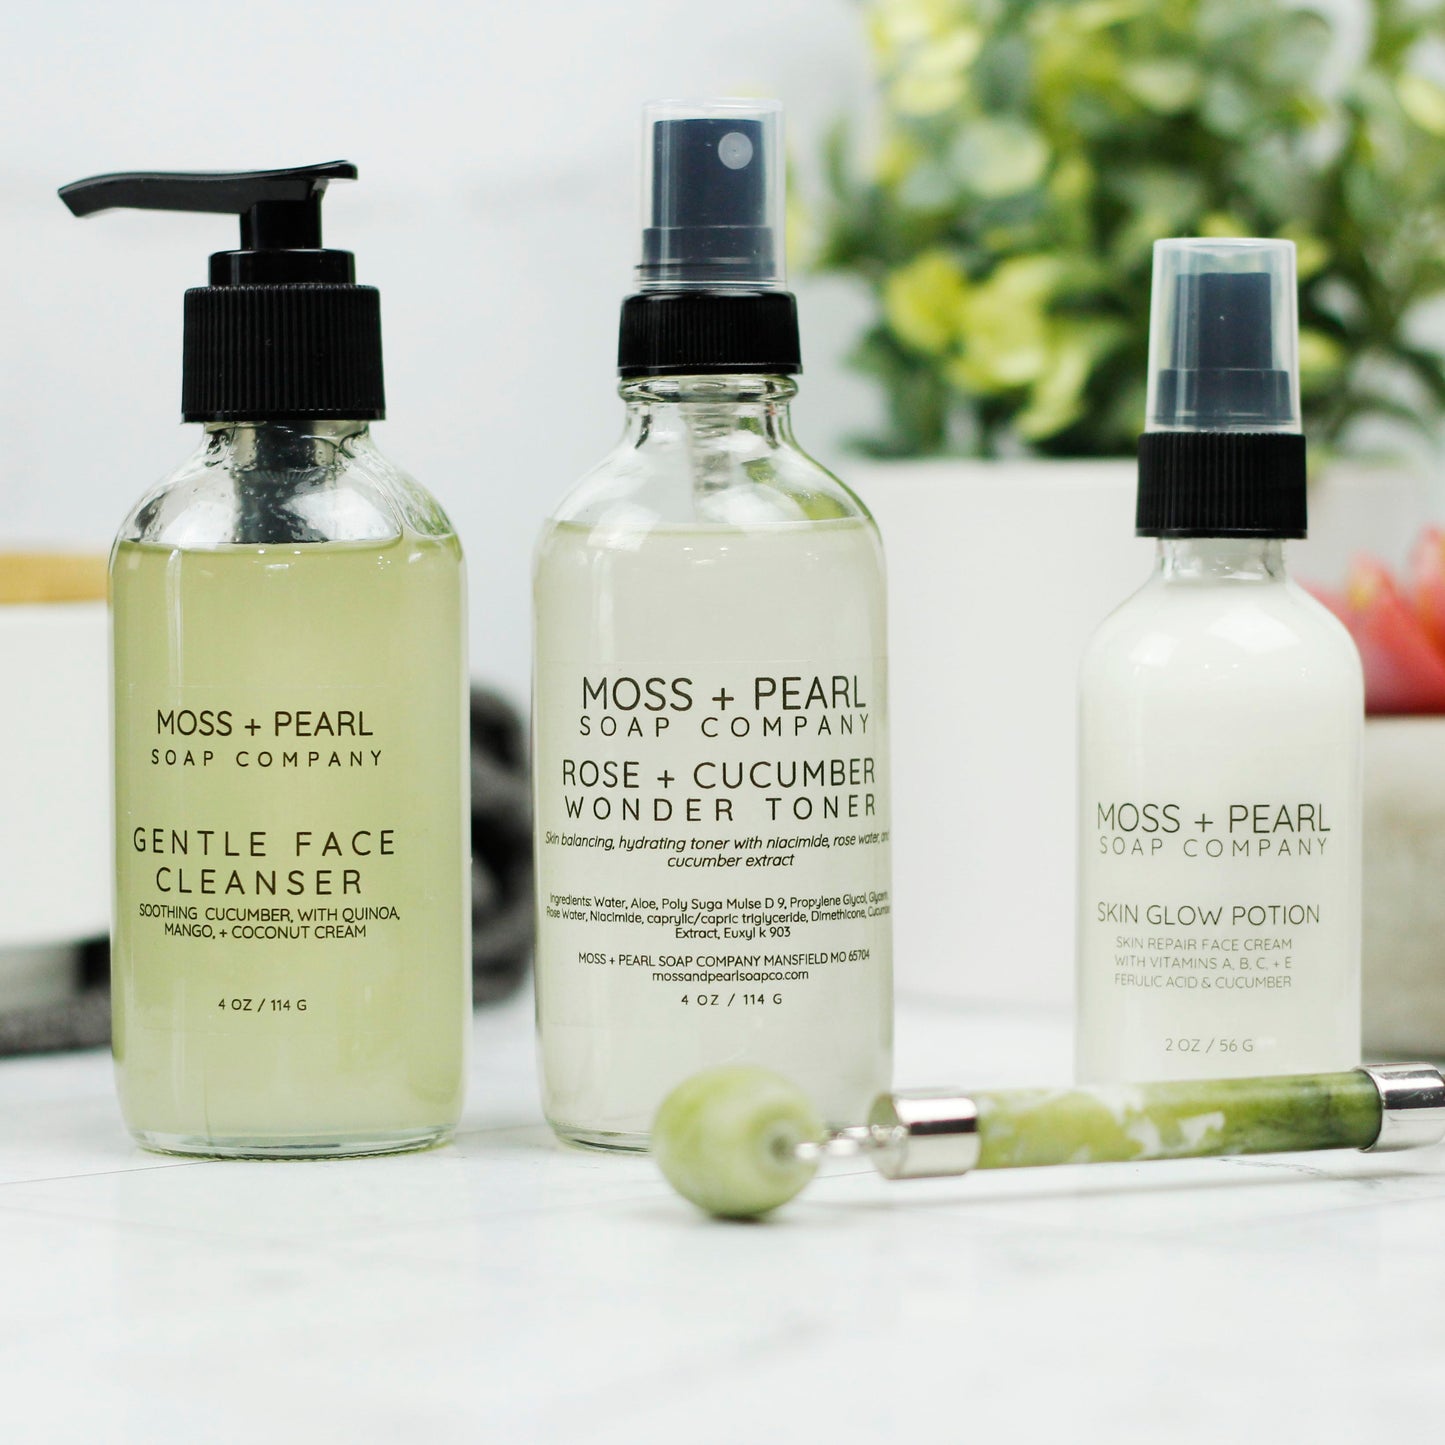 GENTLE FACE CLEANSER Moss + Pearl Soap Company